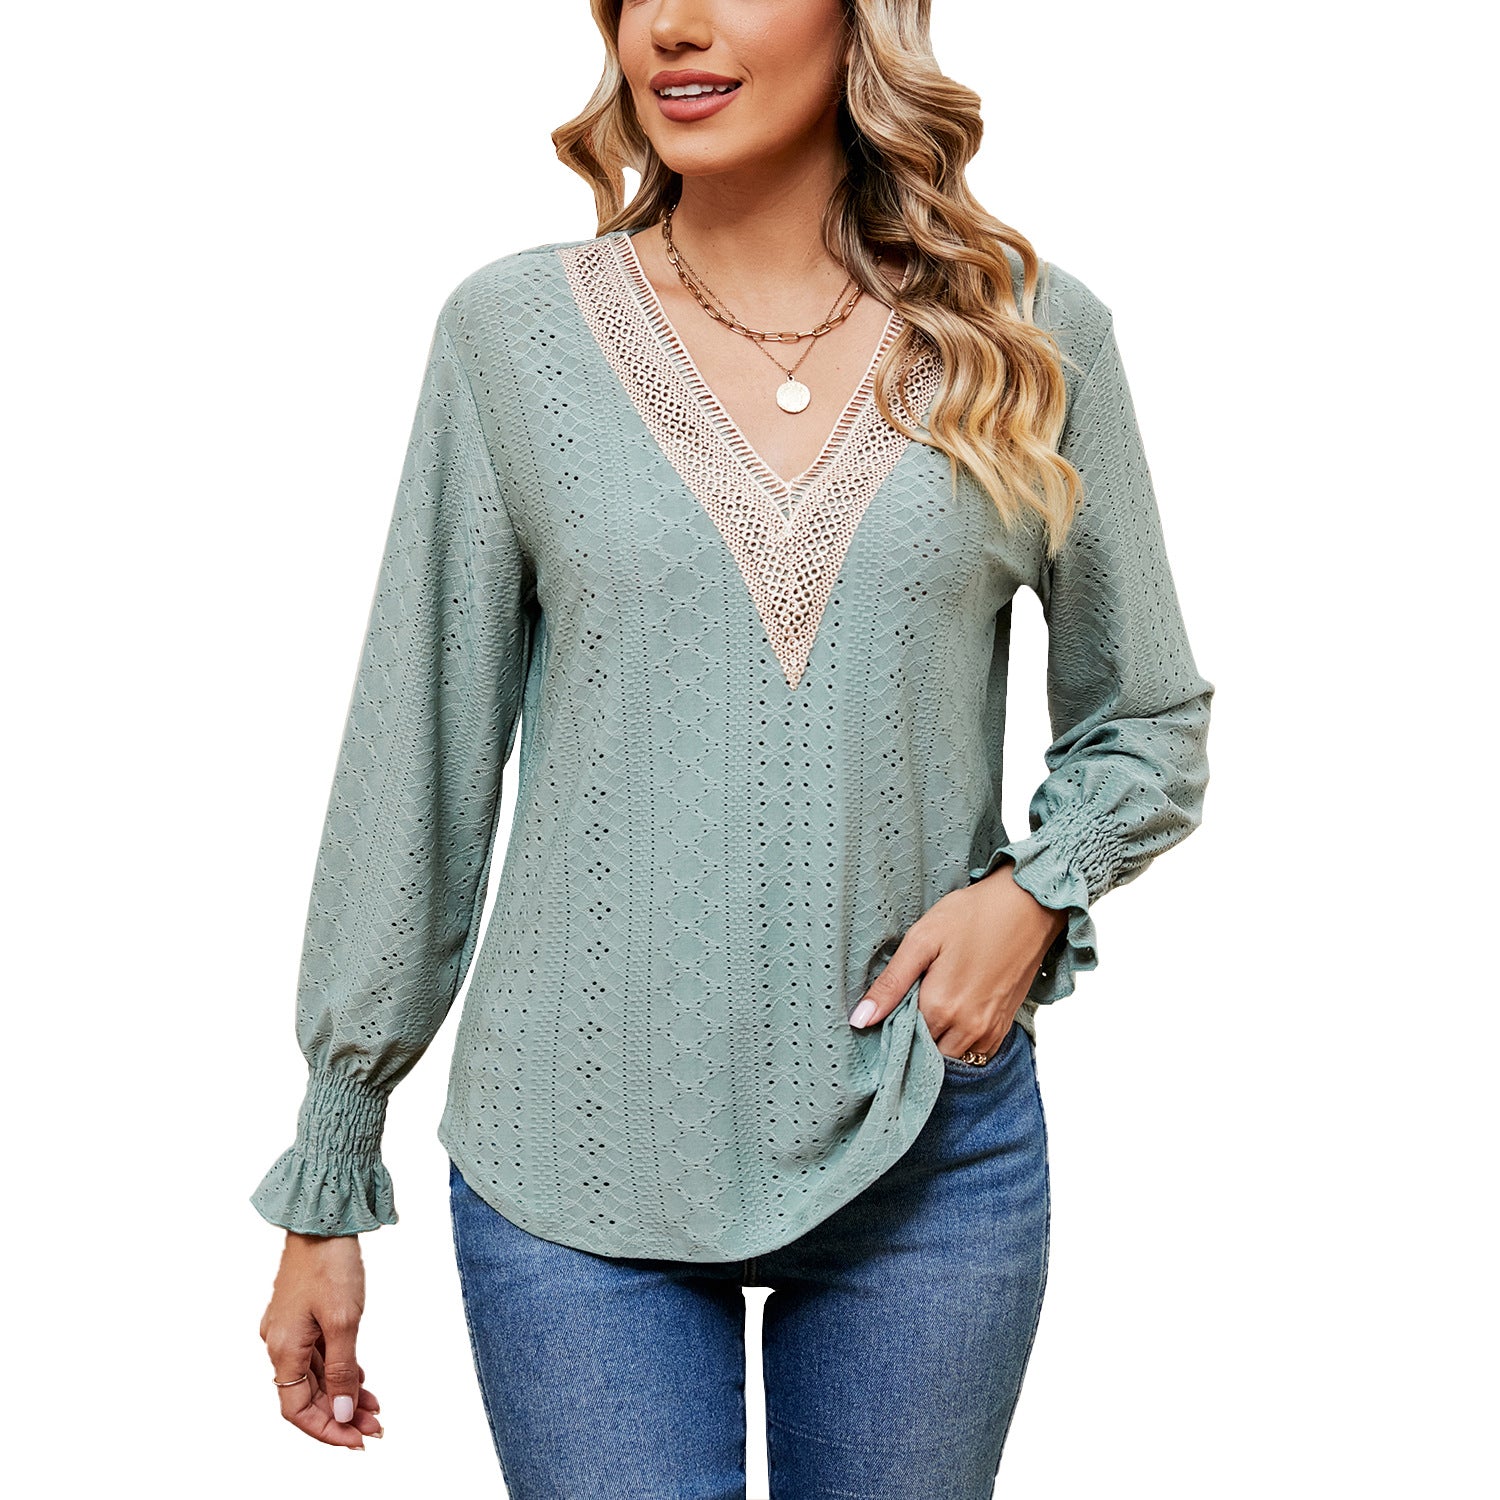 Women's Stitching Long Sleeve Loose-fitting Casual T-shirt Blouses